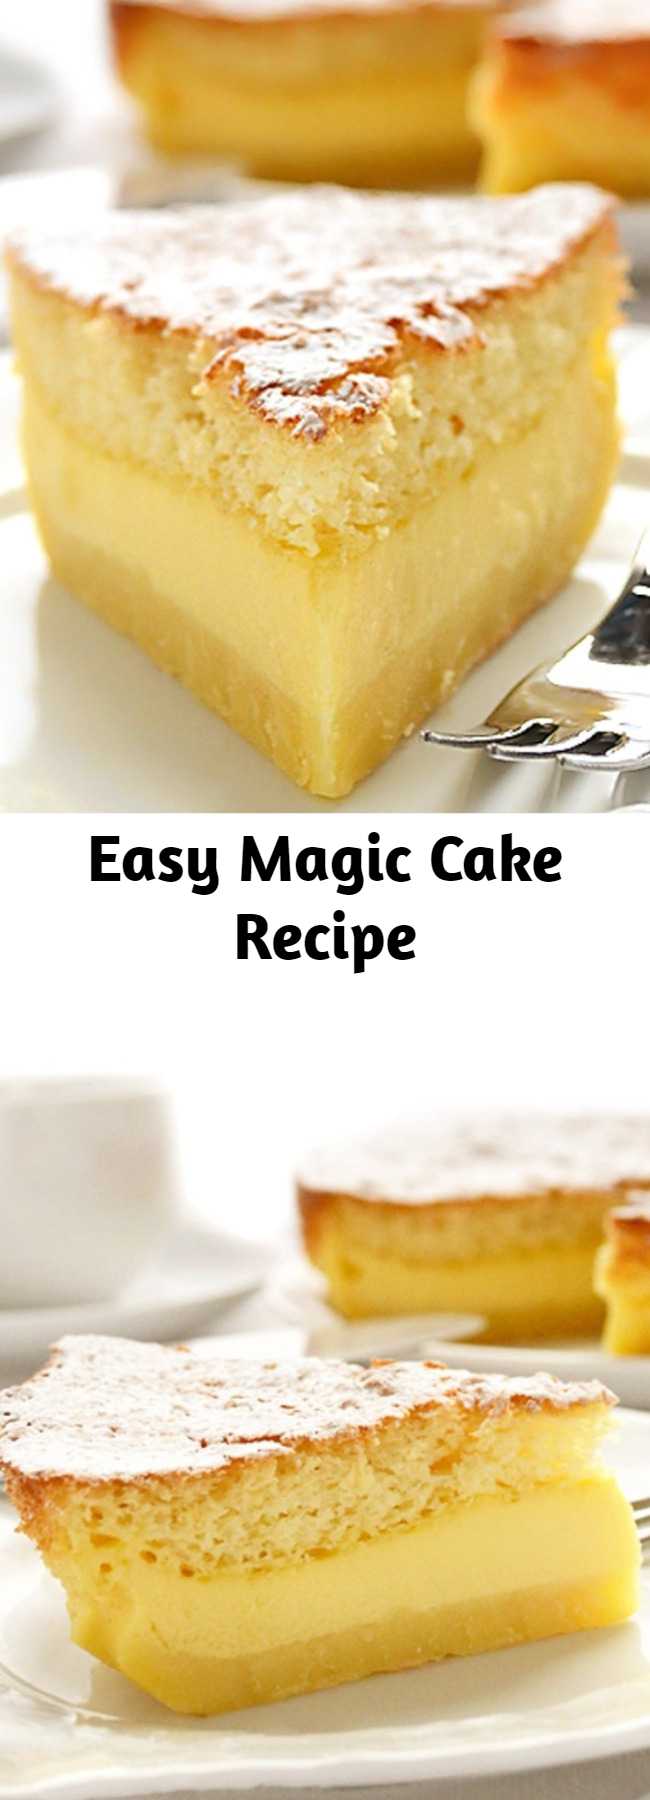 Easy Magic Cake Recipe - Vanilla Magic Cake – 1 batter during baking magically separates into 3 layers: dense on the bottom, custard in the middle, sponge on top.